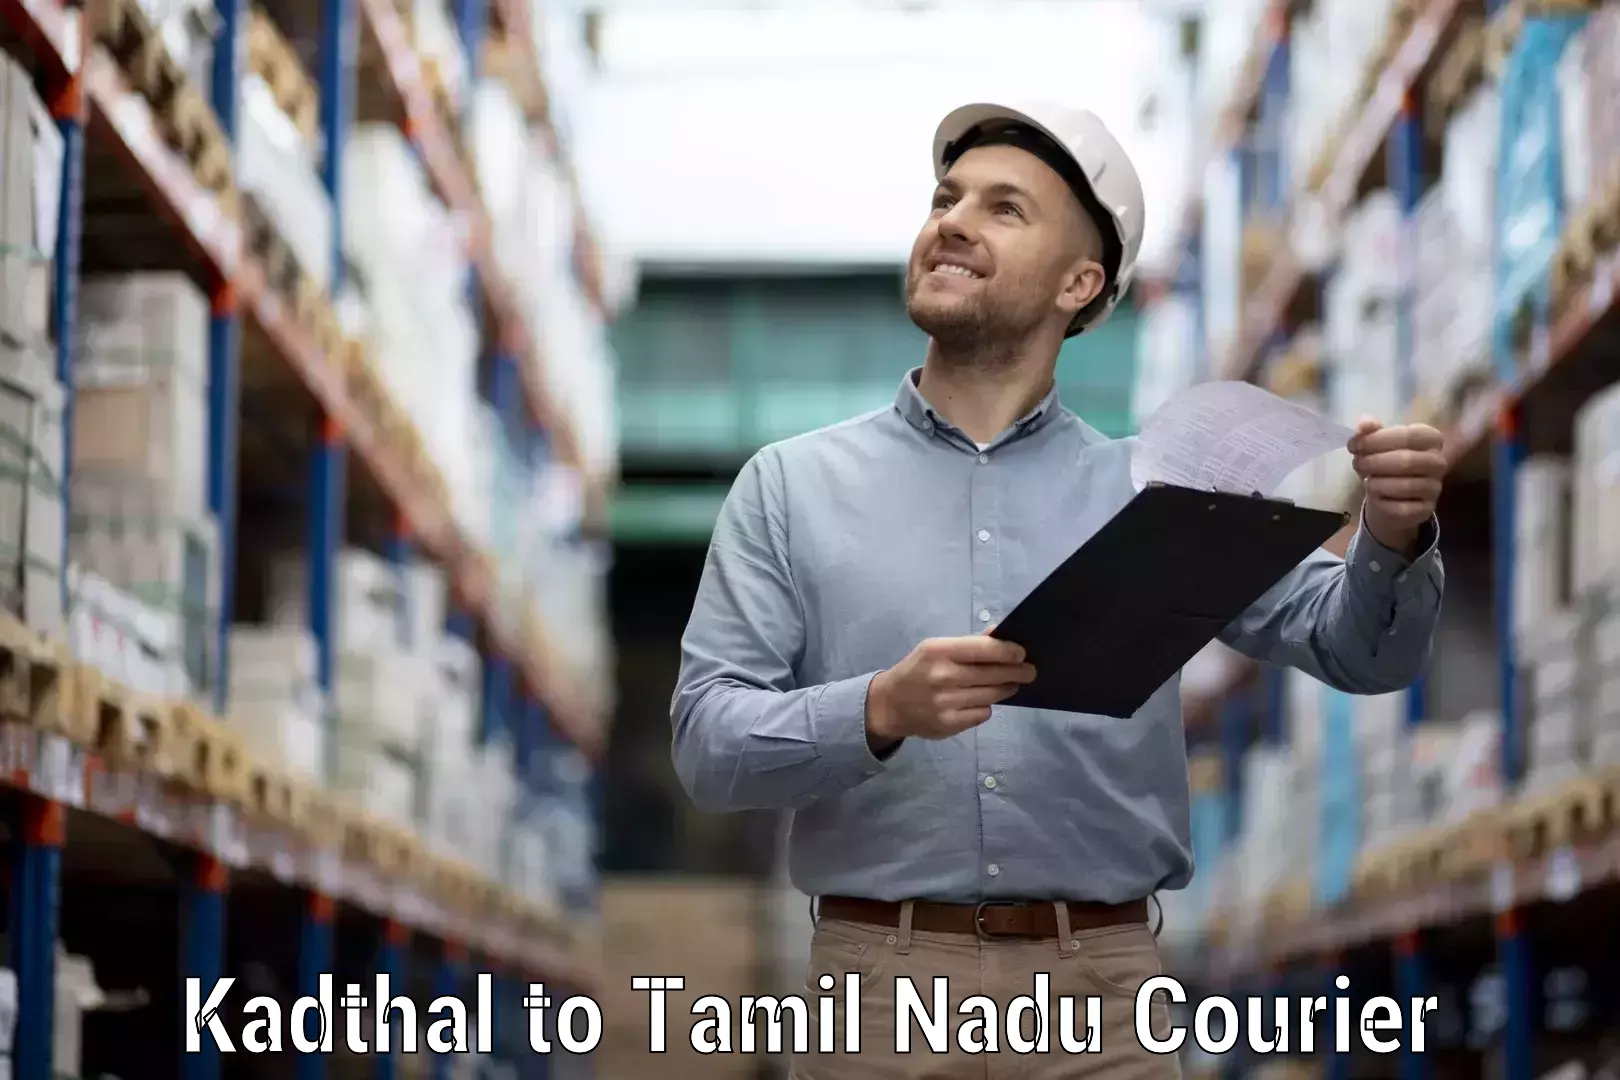 Customized delivery solutions Kadthal to Vallioor